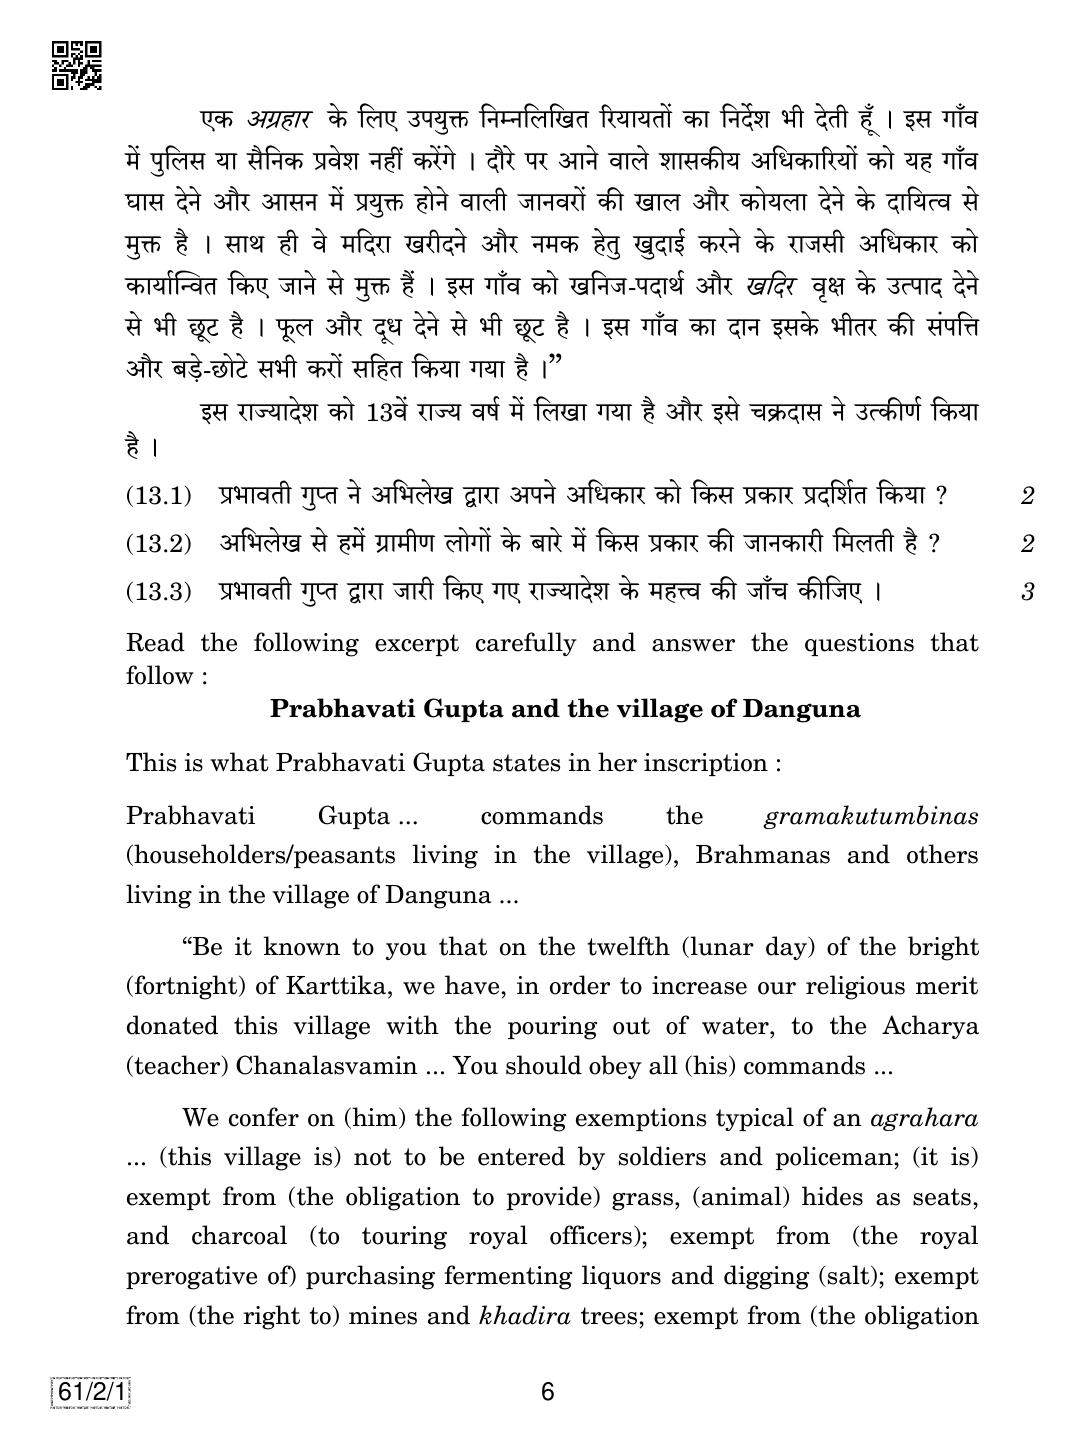 CBSE Class 12 61-2-1 History 2019 Question Paper - Page 6